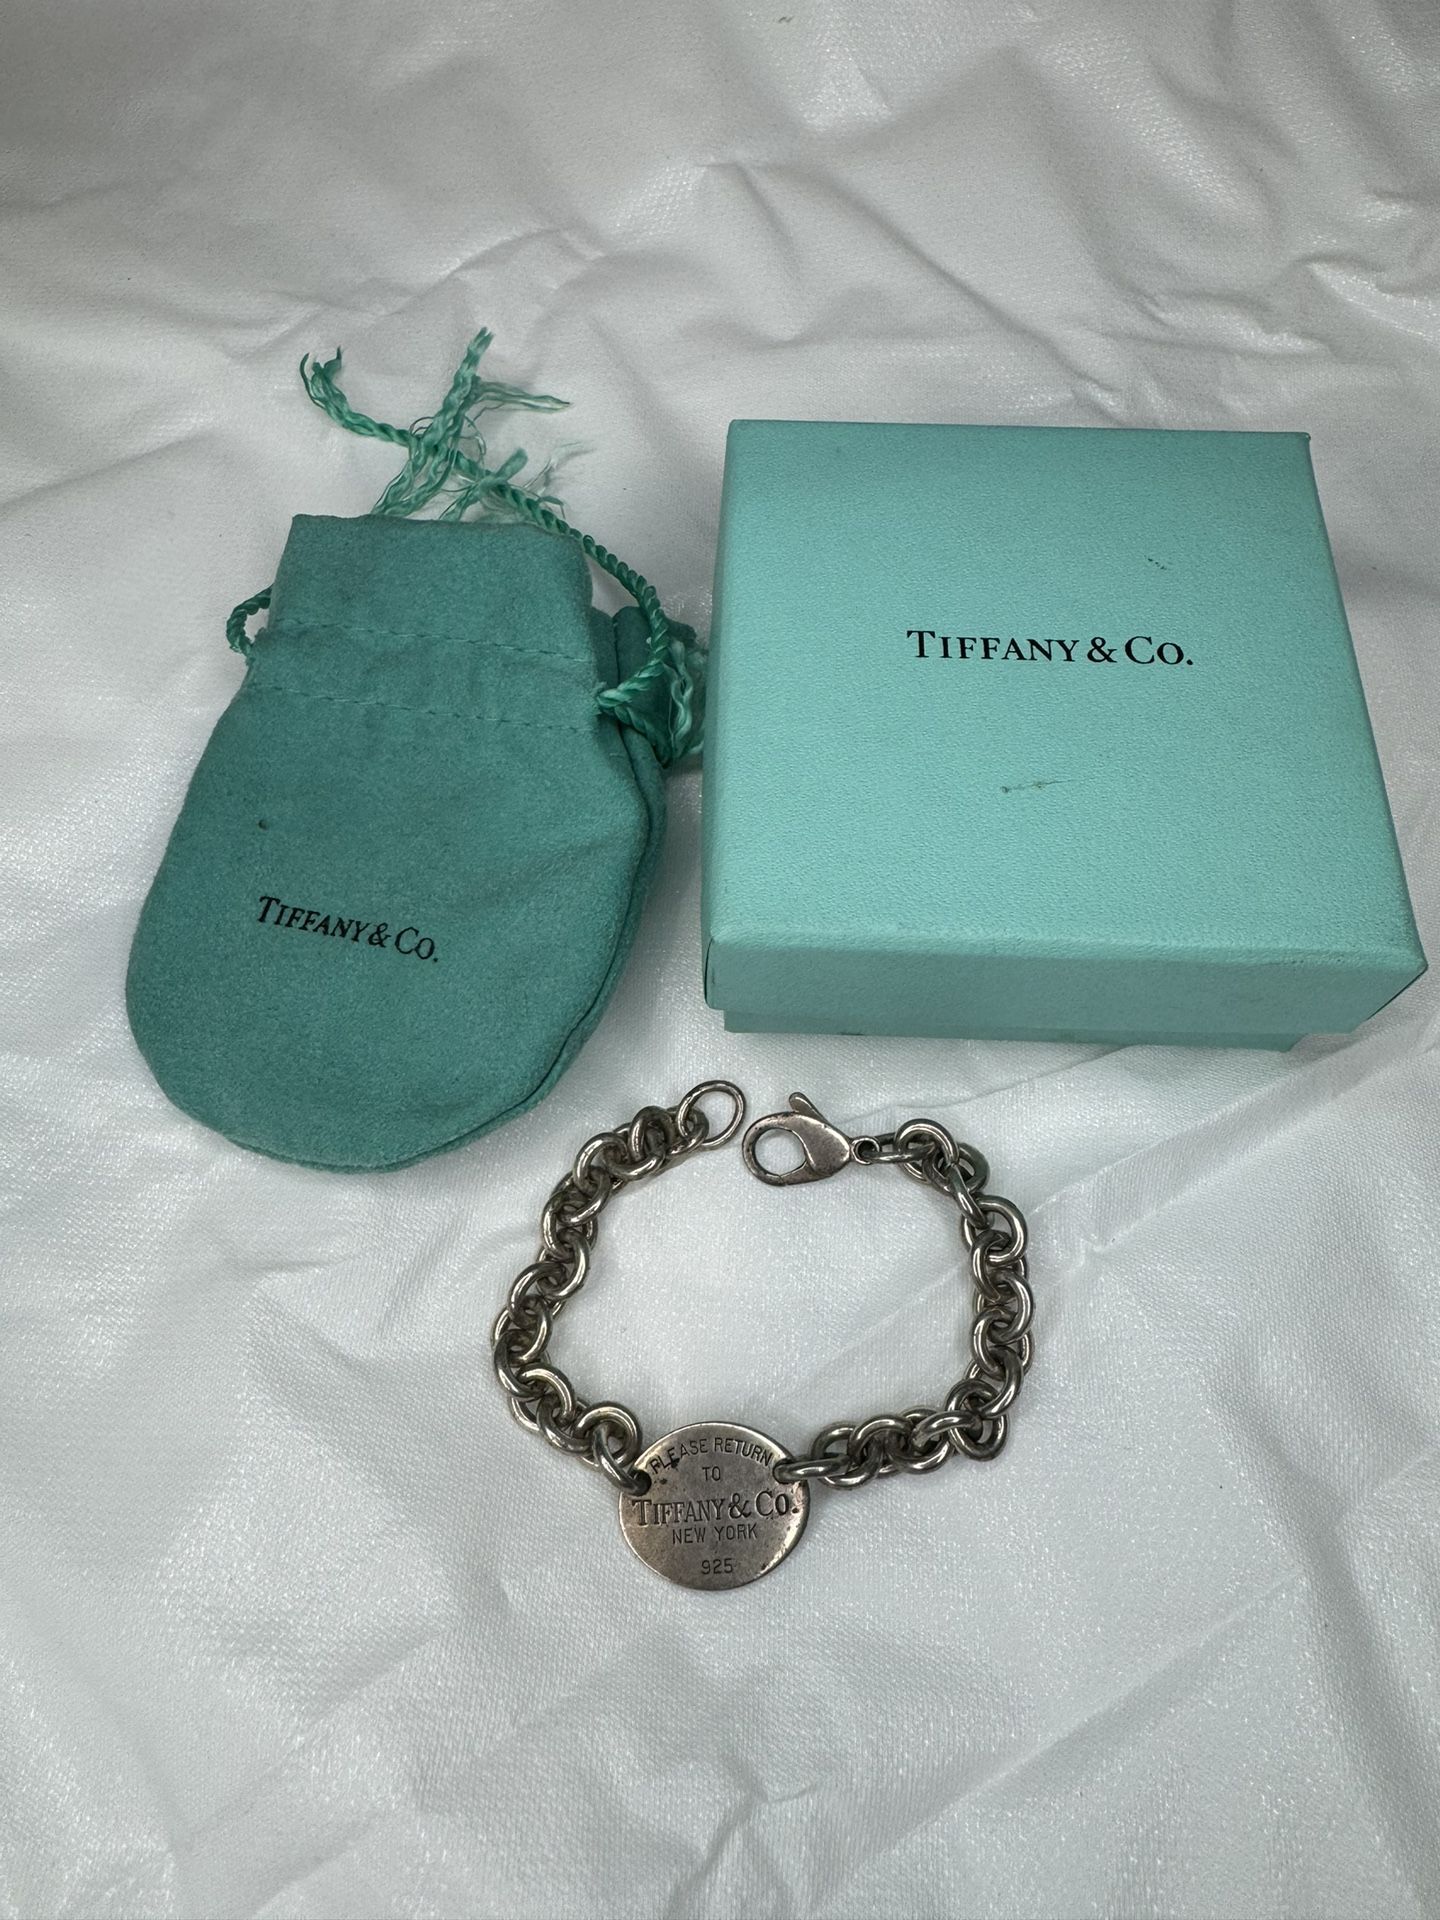 Tiffany & Co Sterling Silver Please Return To New York Round Tag Bracelet 7 1/2"